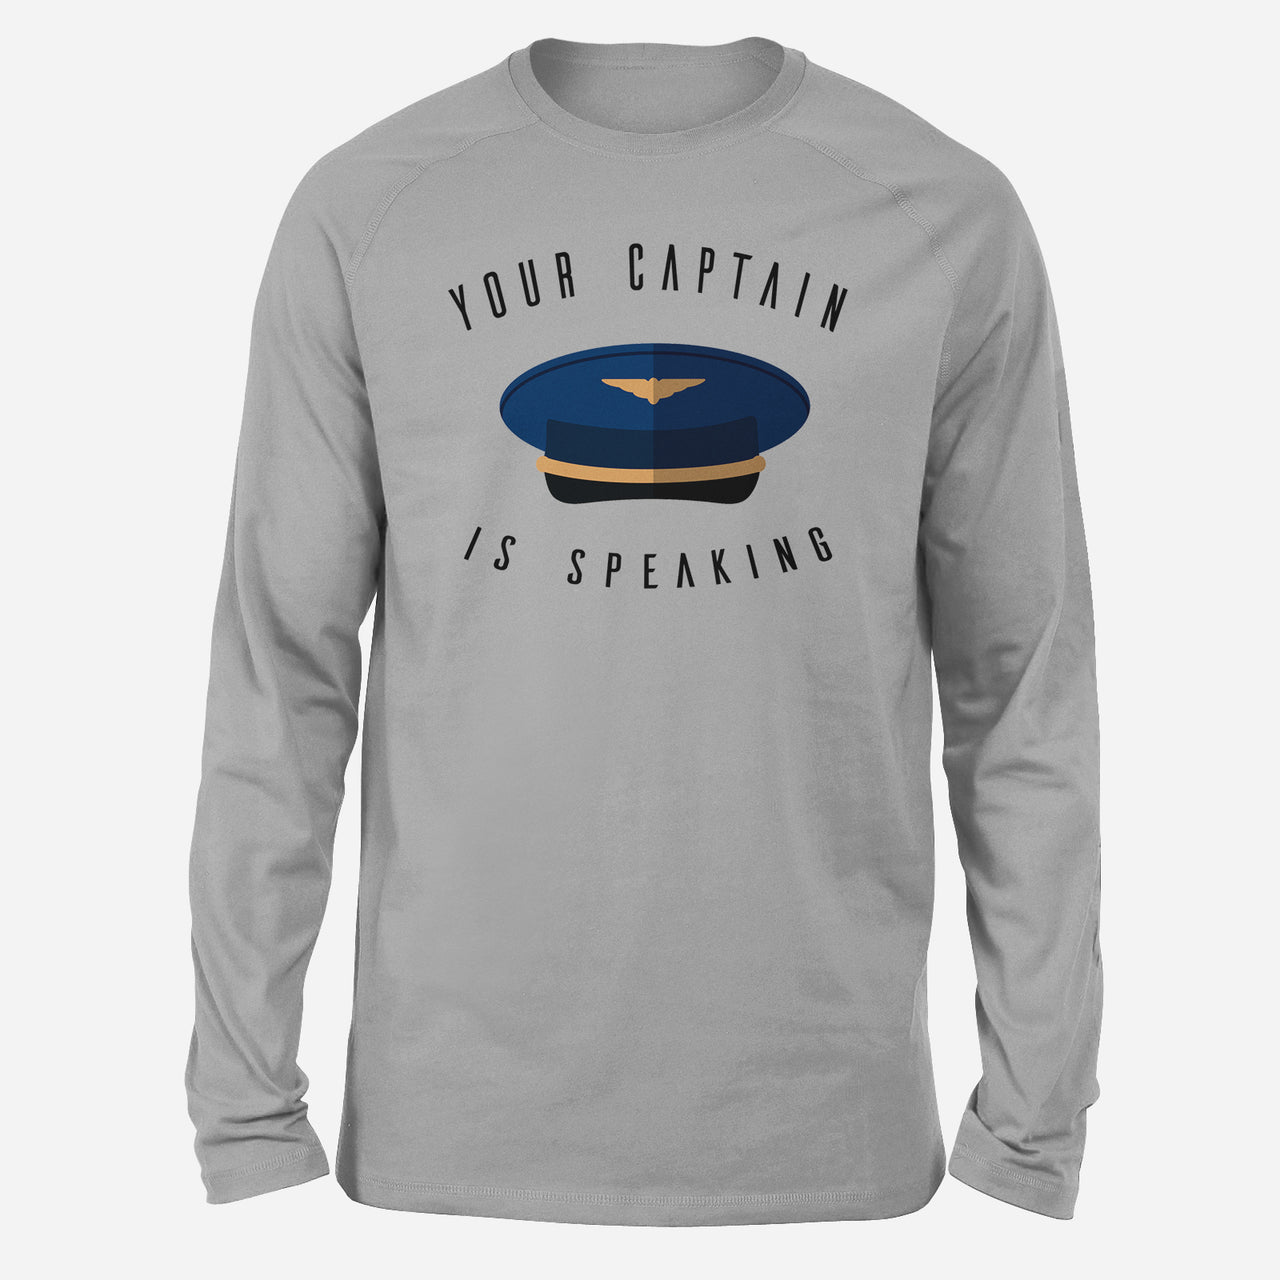 Your Captain Is Speaking Designed Long-Sleeve T-Shirts